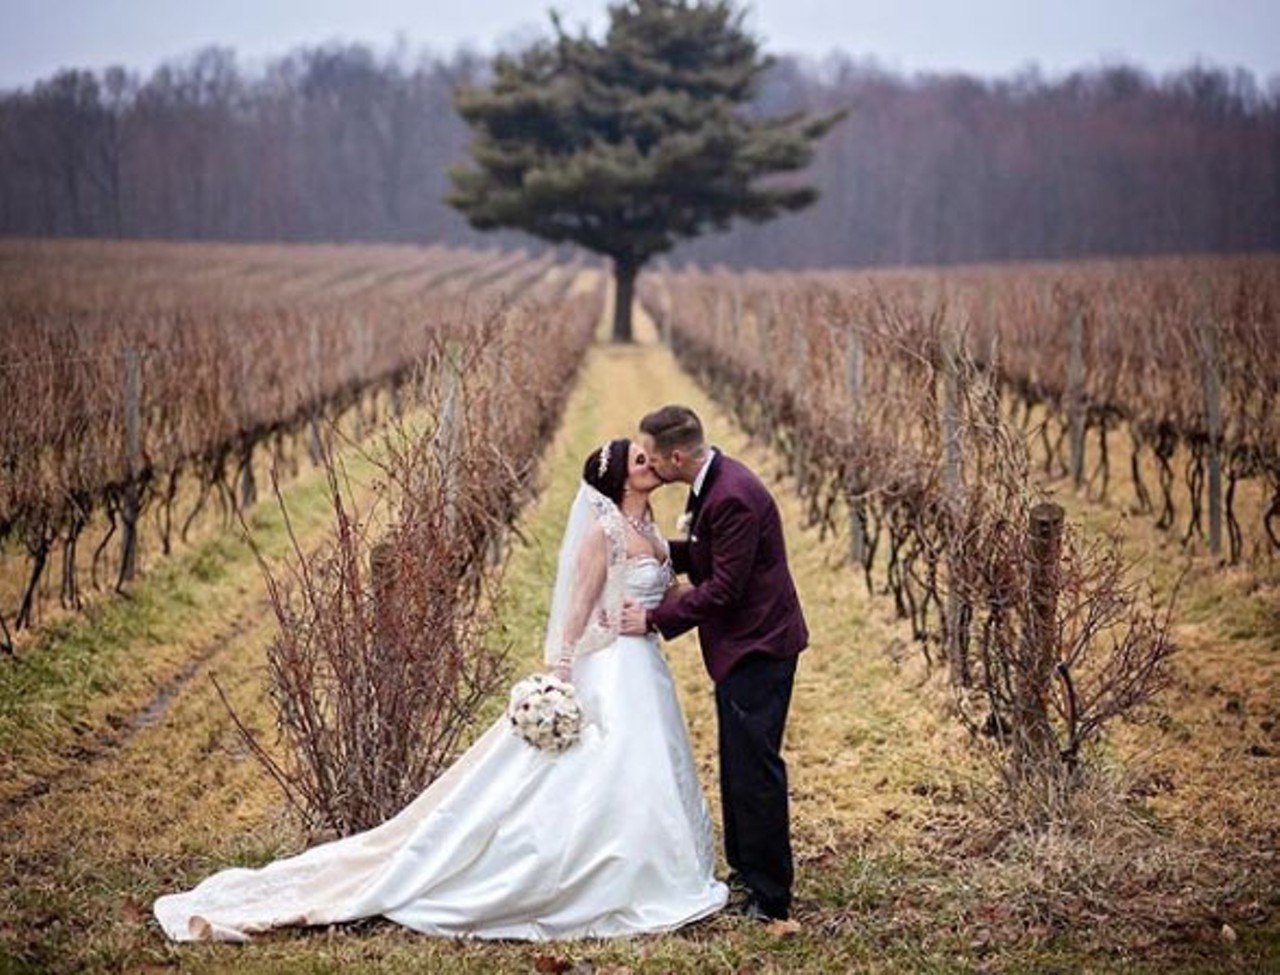 South River Vineyard
6062 South River Rd, Geneva, 440-466-6676
Sitting inside a 100-year-old church overlooking a seemingly endless vineyard, area visitors will find a peaceful winery that serves delicious wines and offers tastings seven days a week. 
Photo via galacticcaptures/Instagram